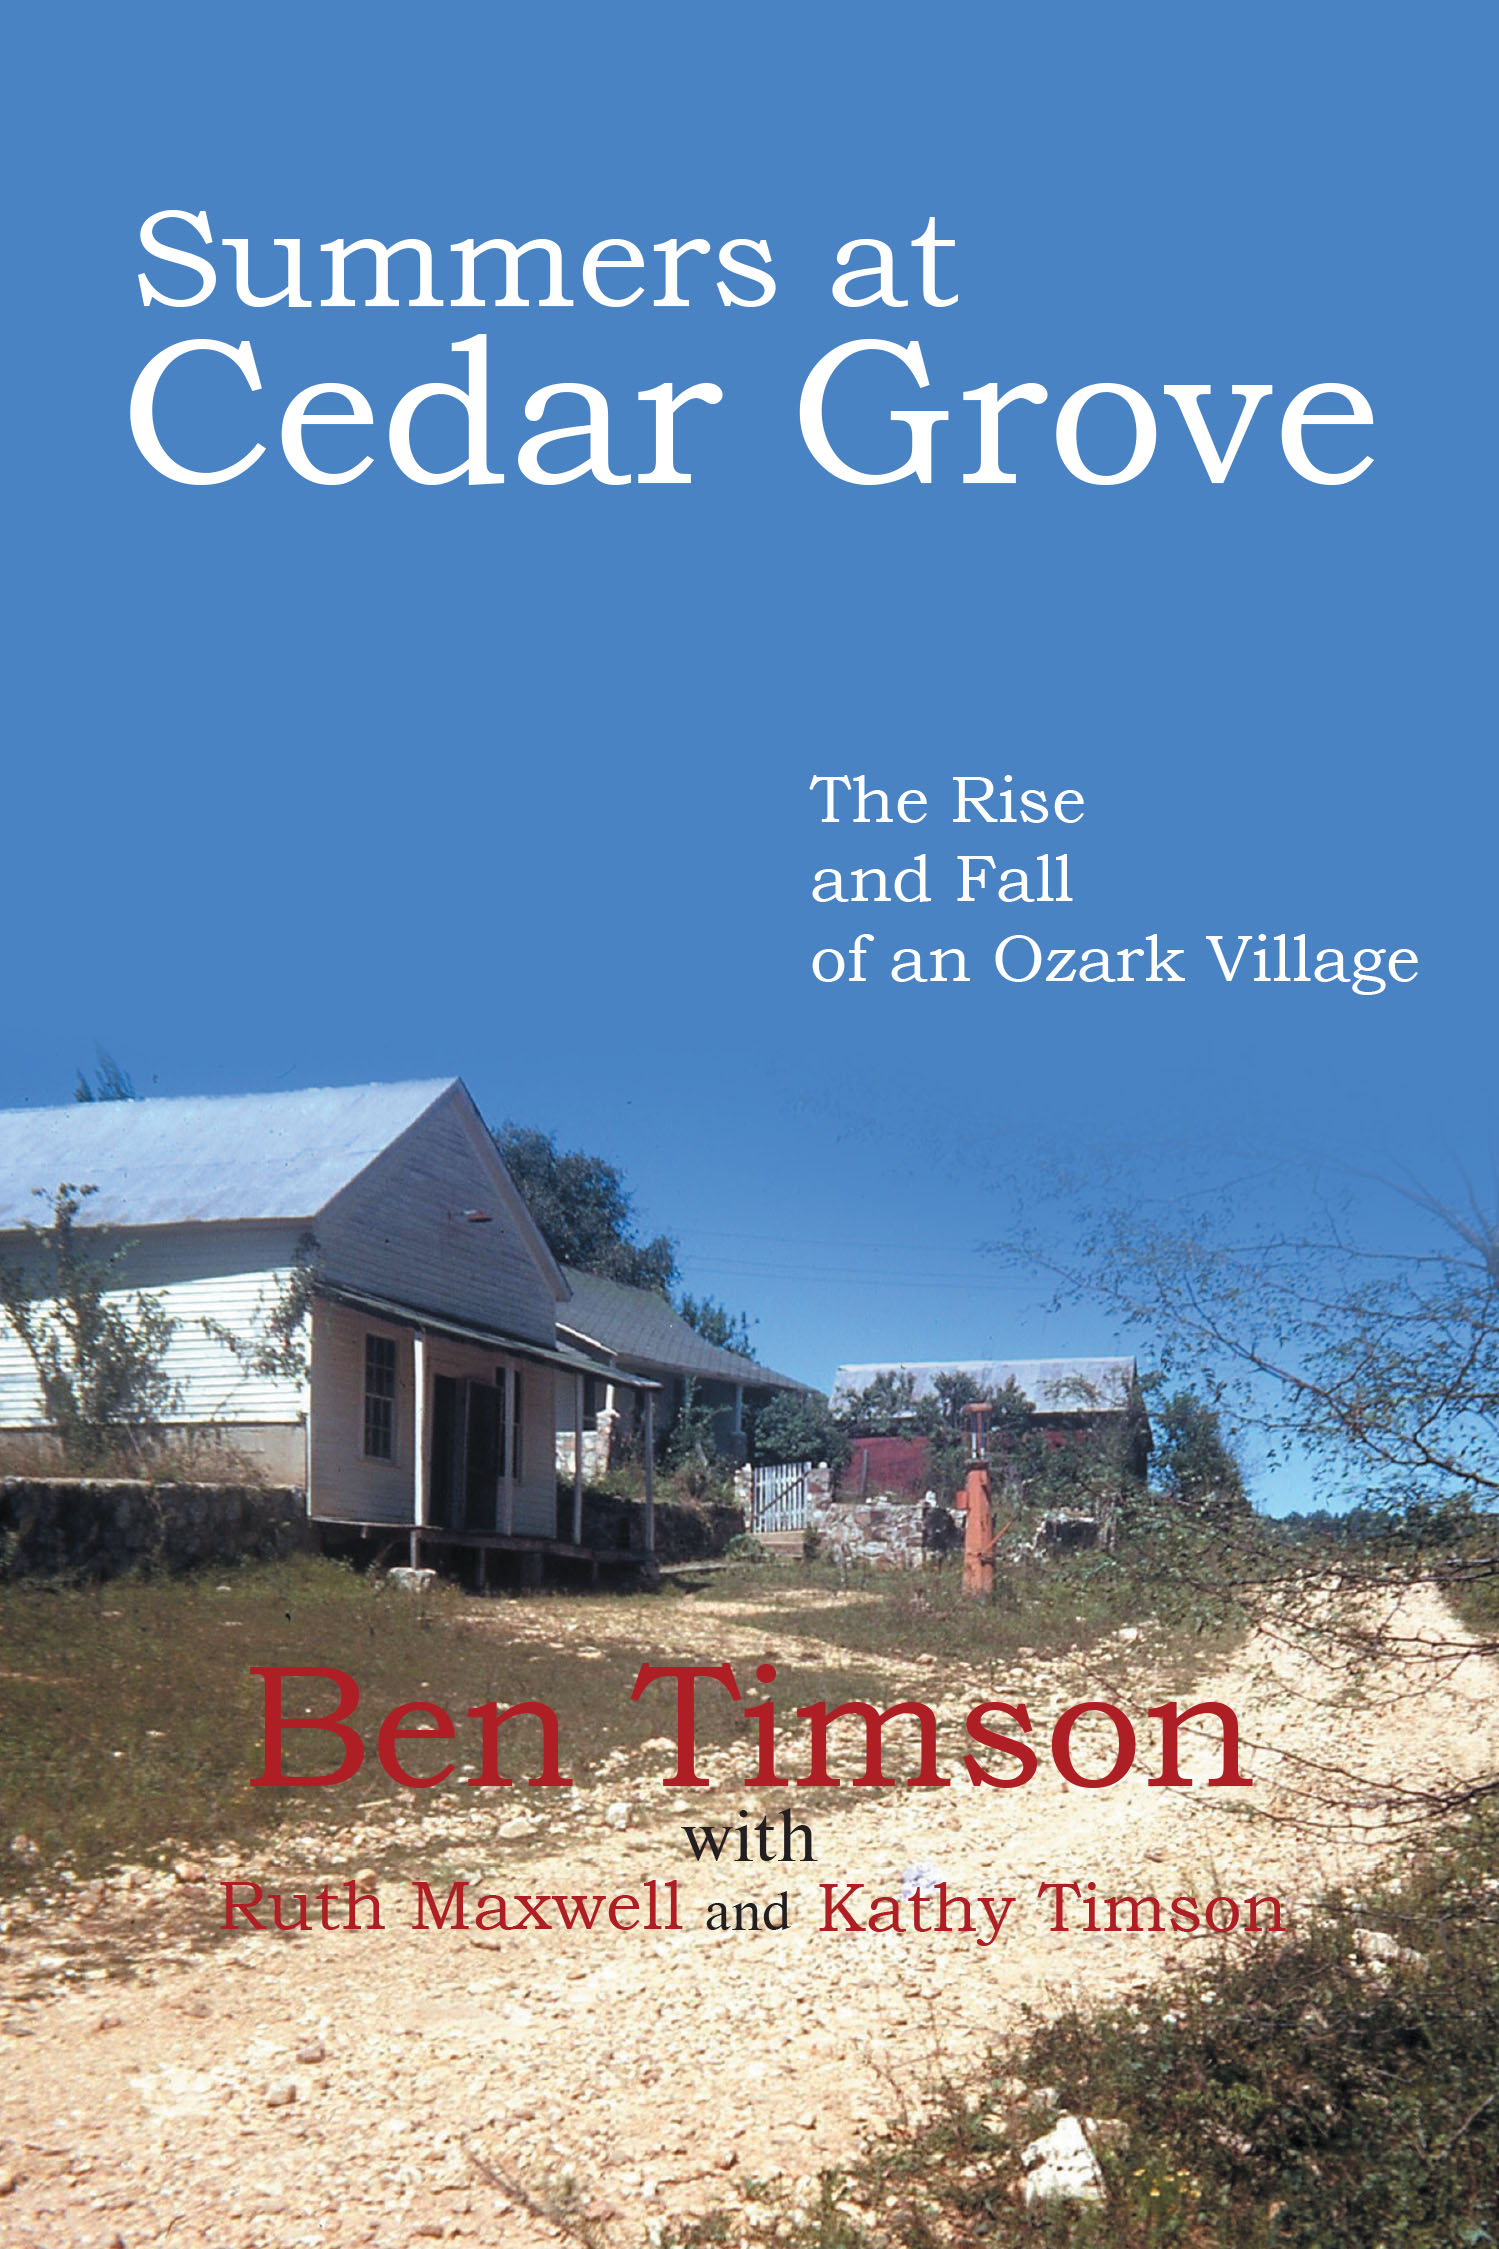 Author Ben Timson’s New Book, “Summers at Cedar Grove: The Rise and Fall of an Ozark Village,” Presents Personal Memories and Historical Accounts of Cedar Grove’s Legacy